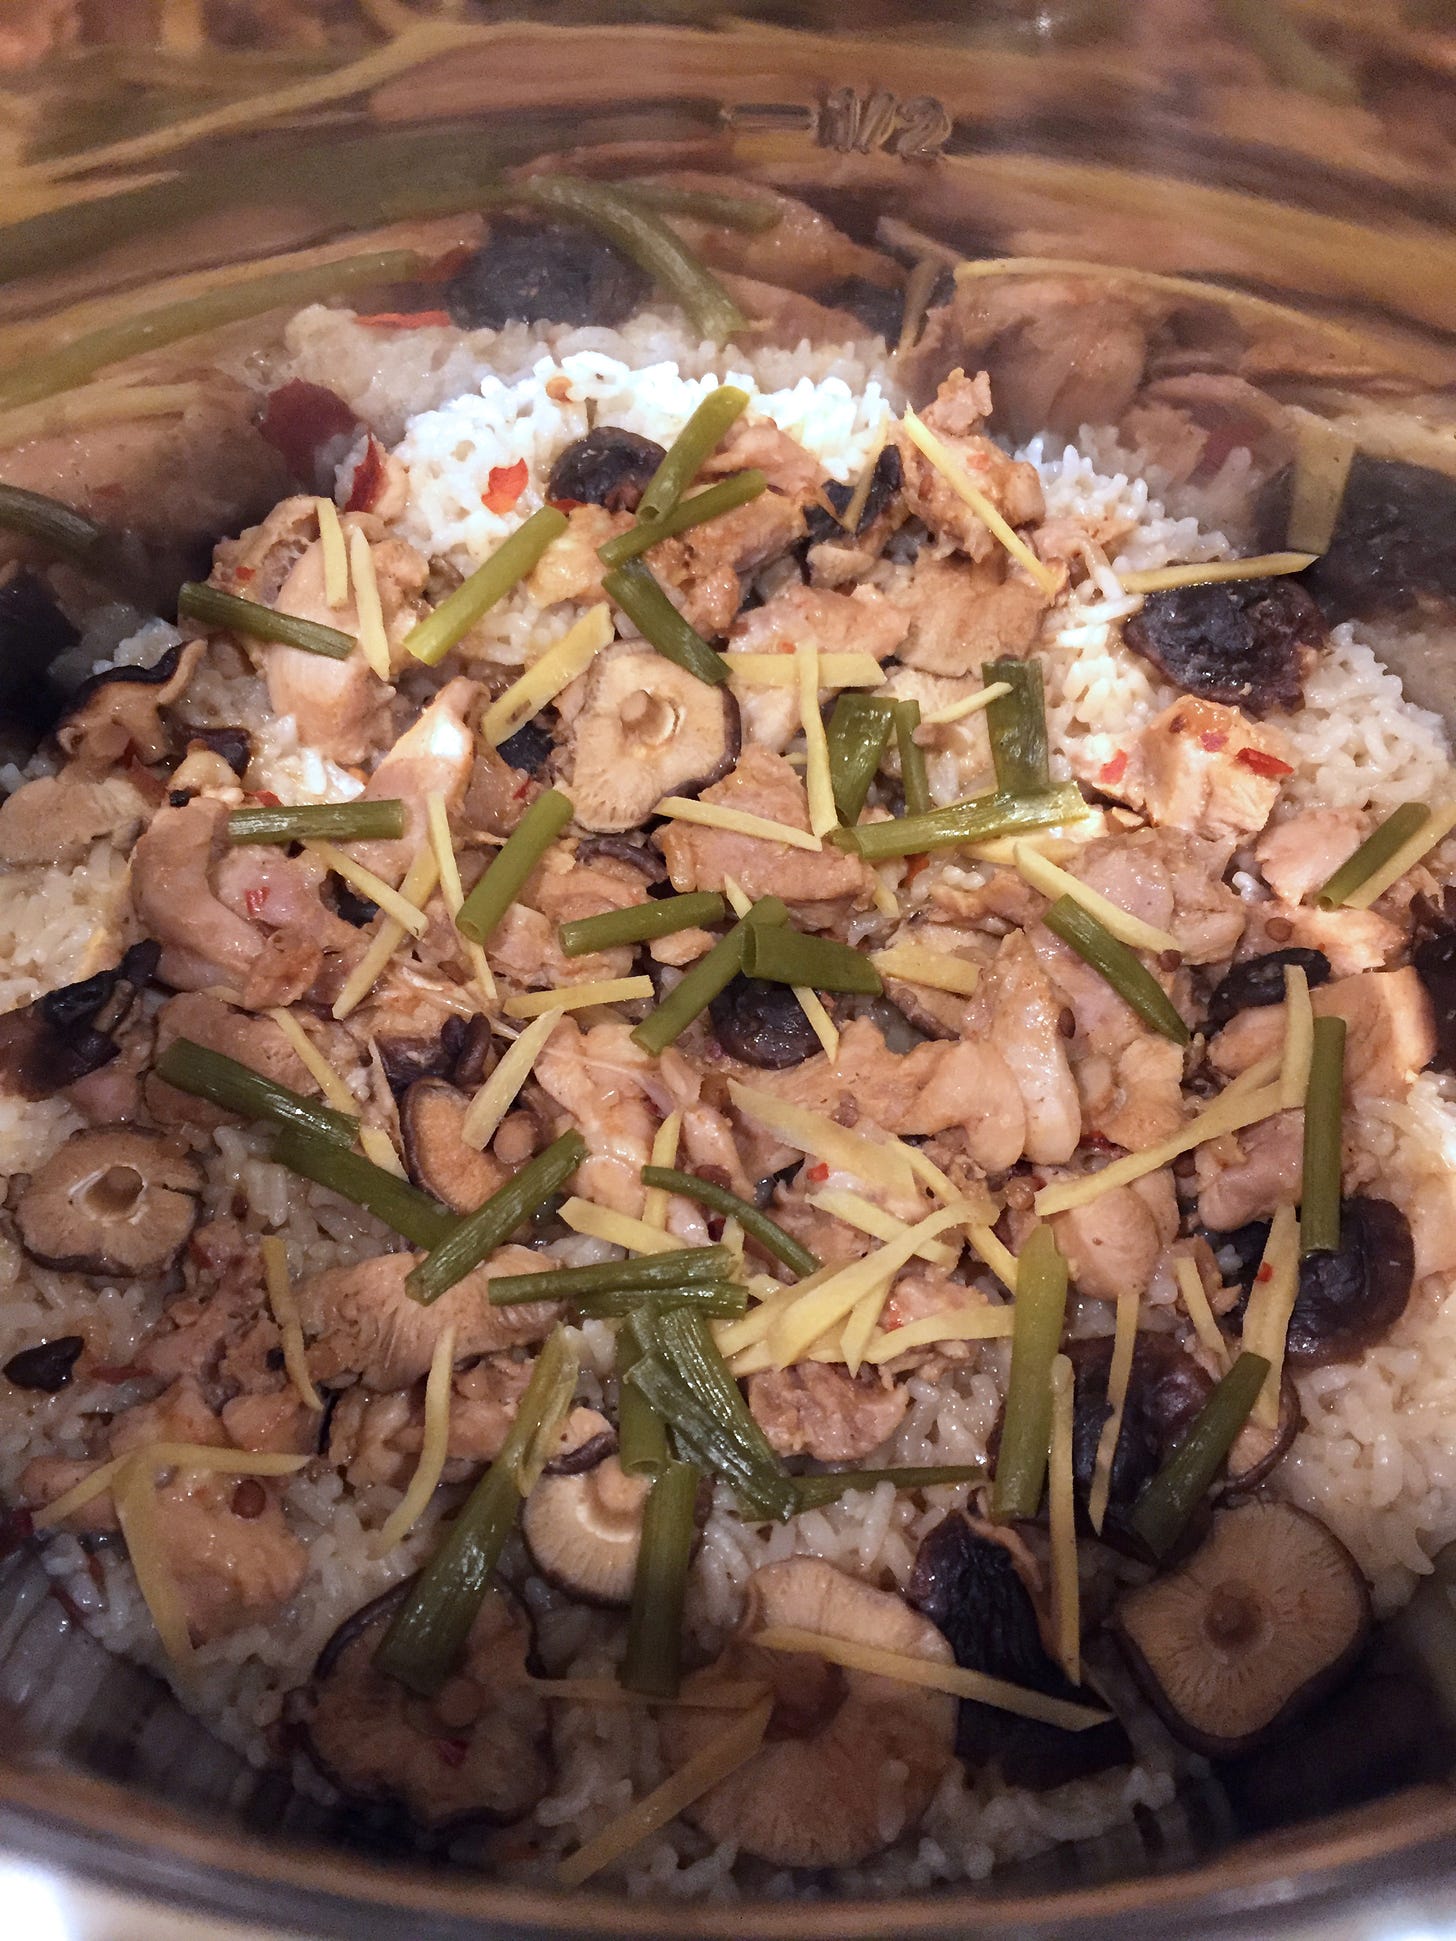 cooked chicken pieces and small shiitake mushrooms sit on a bed of rice in a large silver pot. Slices of ginger and green onion are scattered on top.